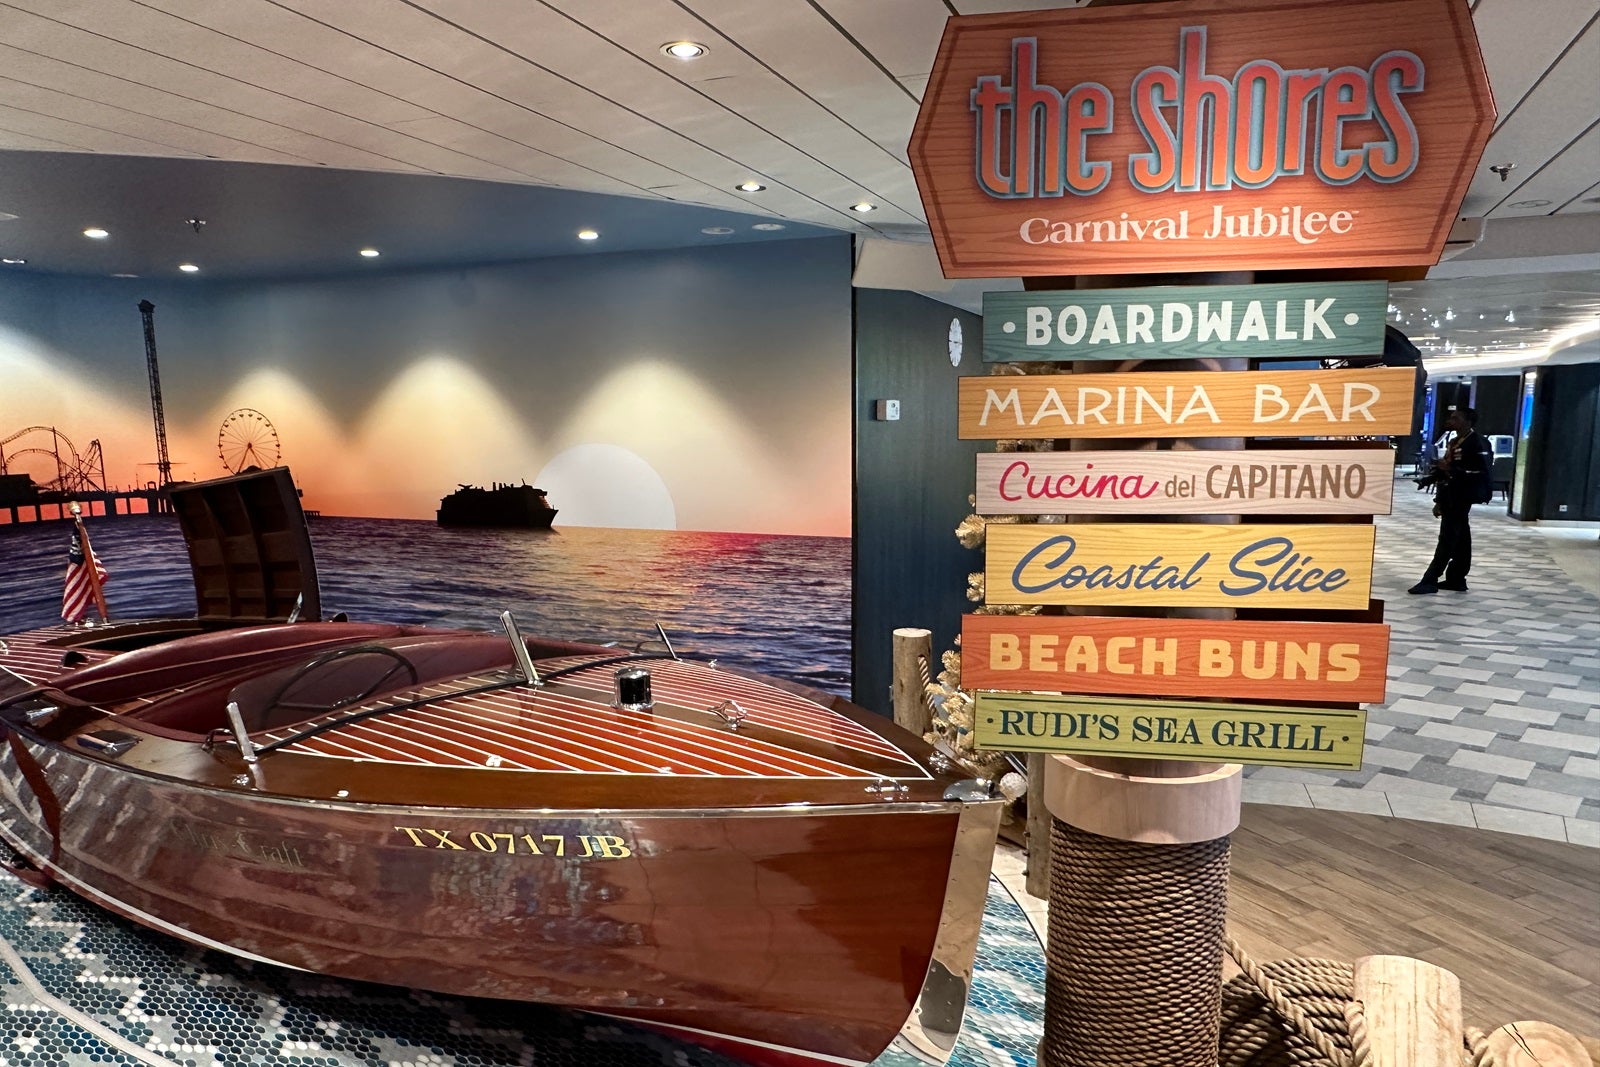 A wooden boat set up as a photo spot with jute-wrapped poles in front of it, a directional sign that shows passengers where different areas of the ship are and a sunset water backdrop behind it